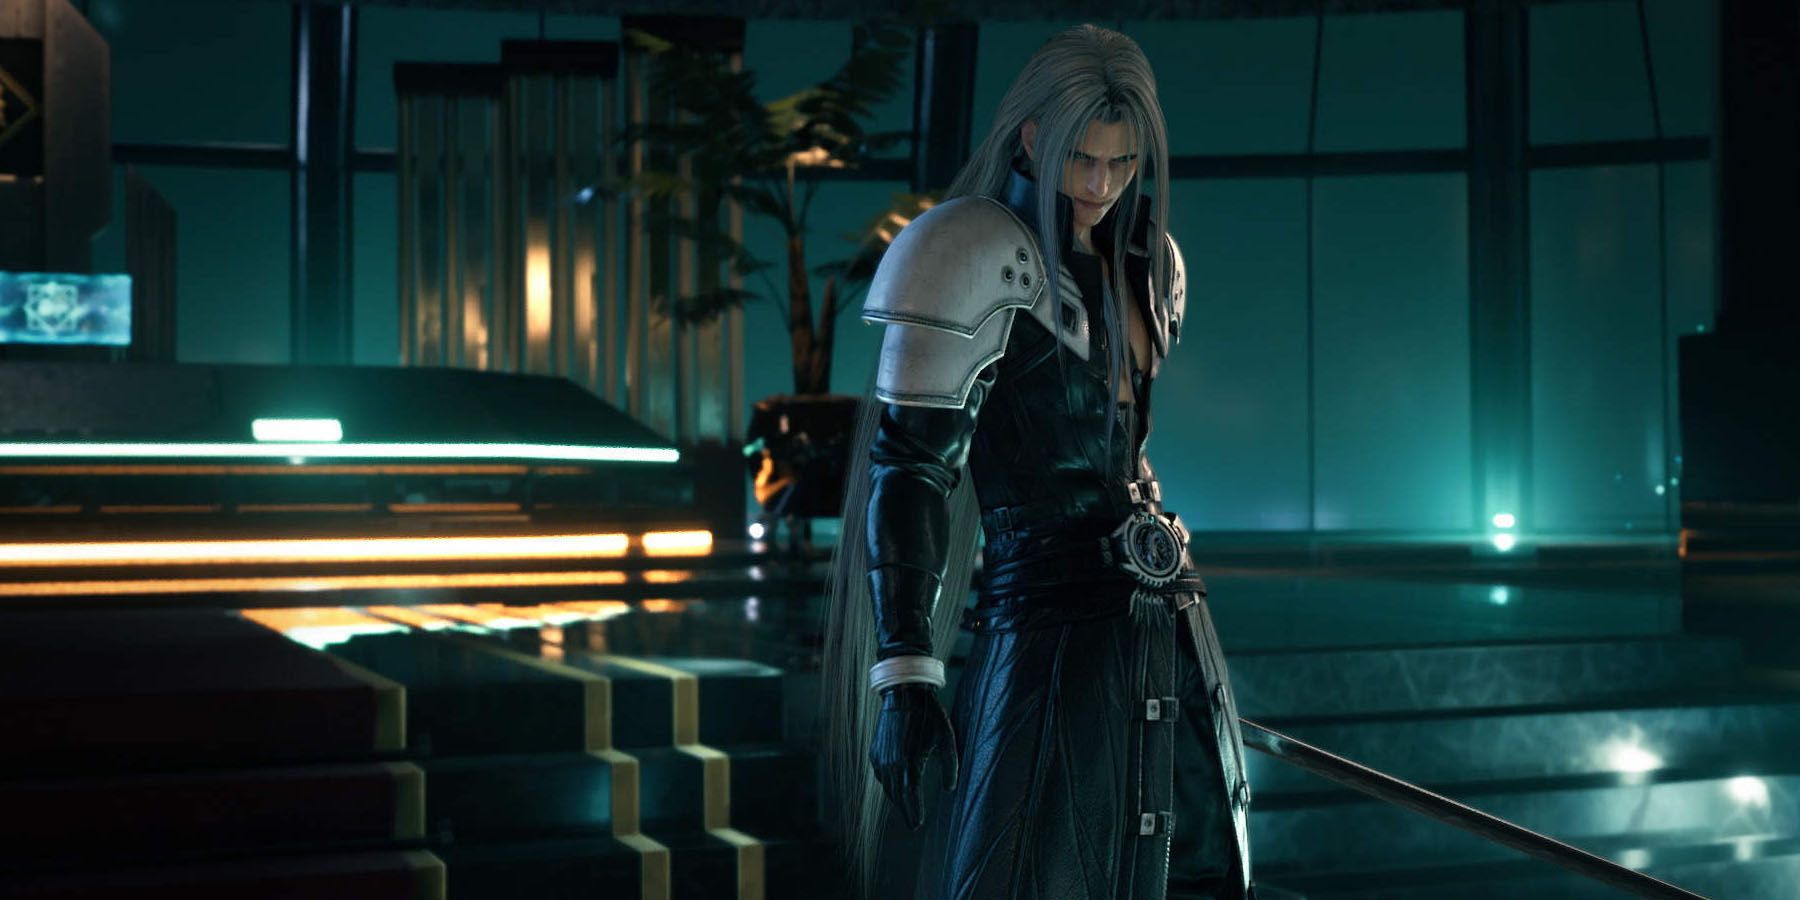 Final Fantasy 7 Remake limits player accessibility with its splintered release schedule